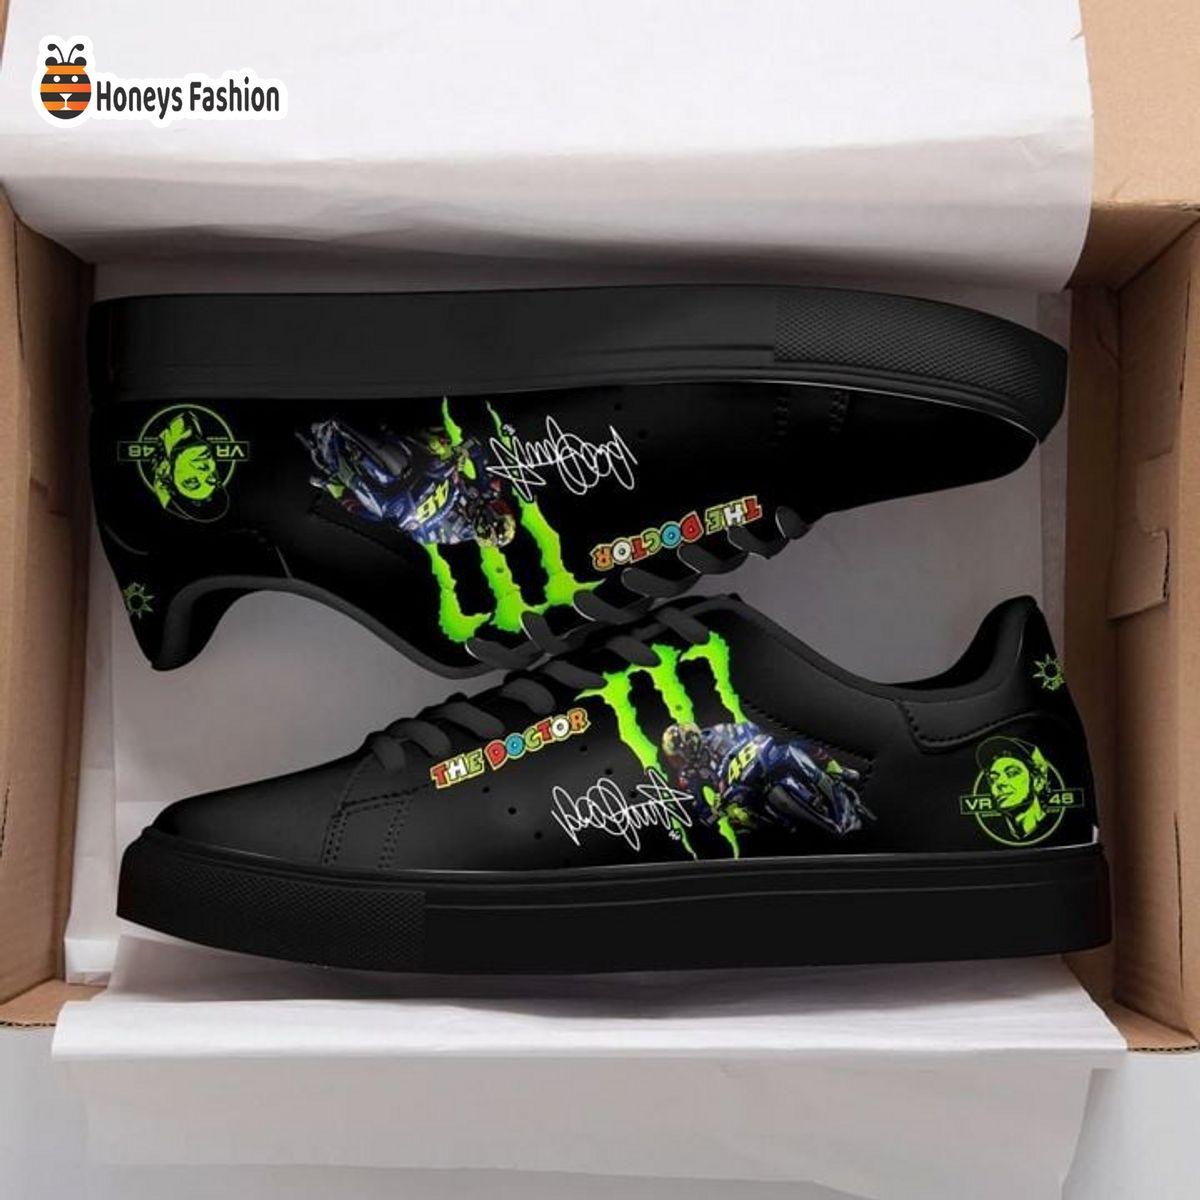 VR46 Signature Stan Smith Low Top Shoes